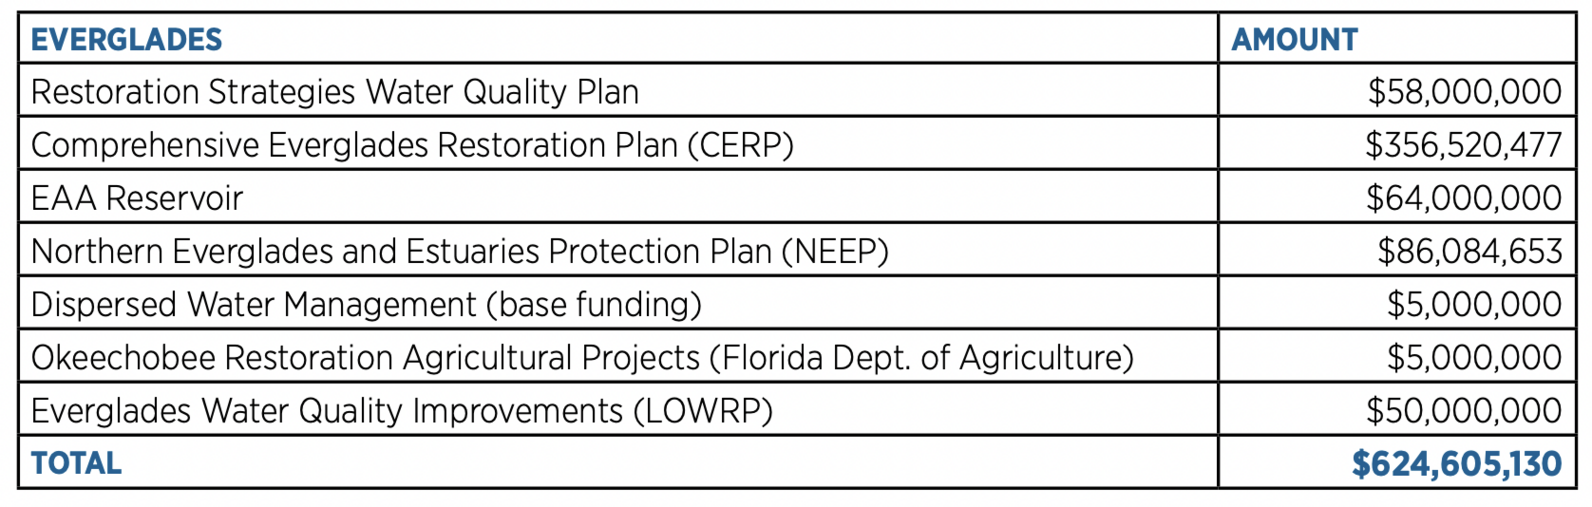 Table showing Everglades funding.